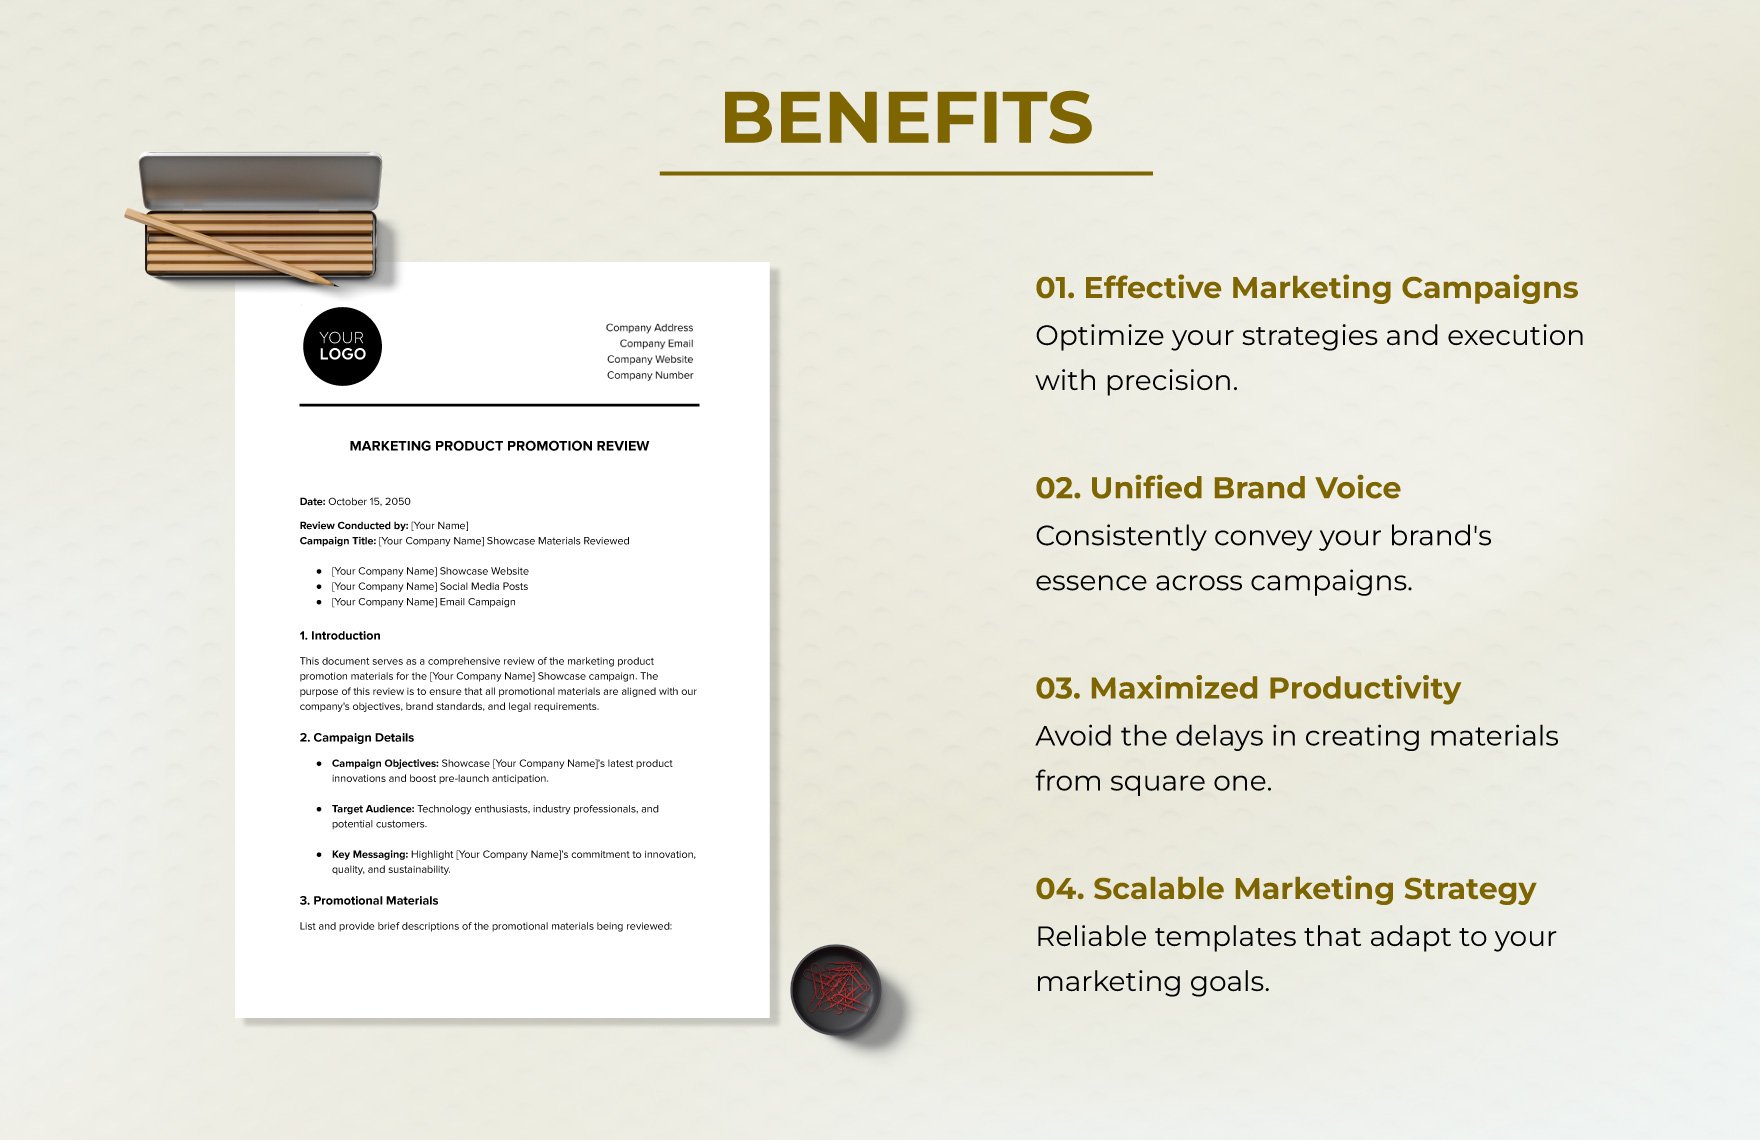 Marketing Product Promotion Review Template